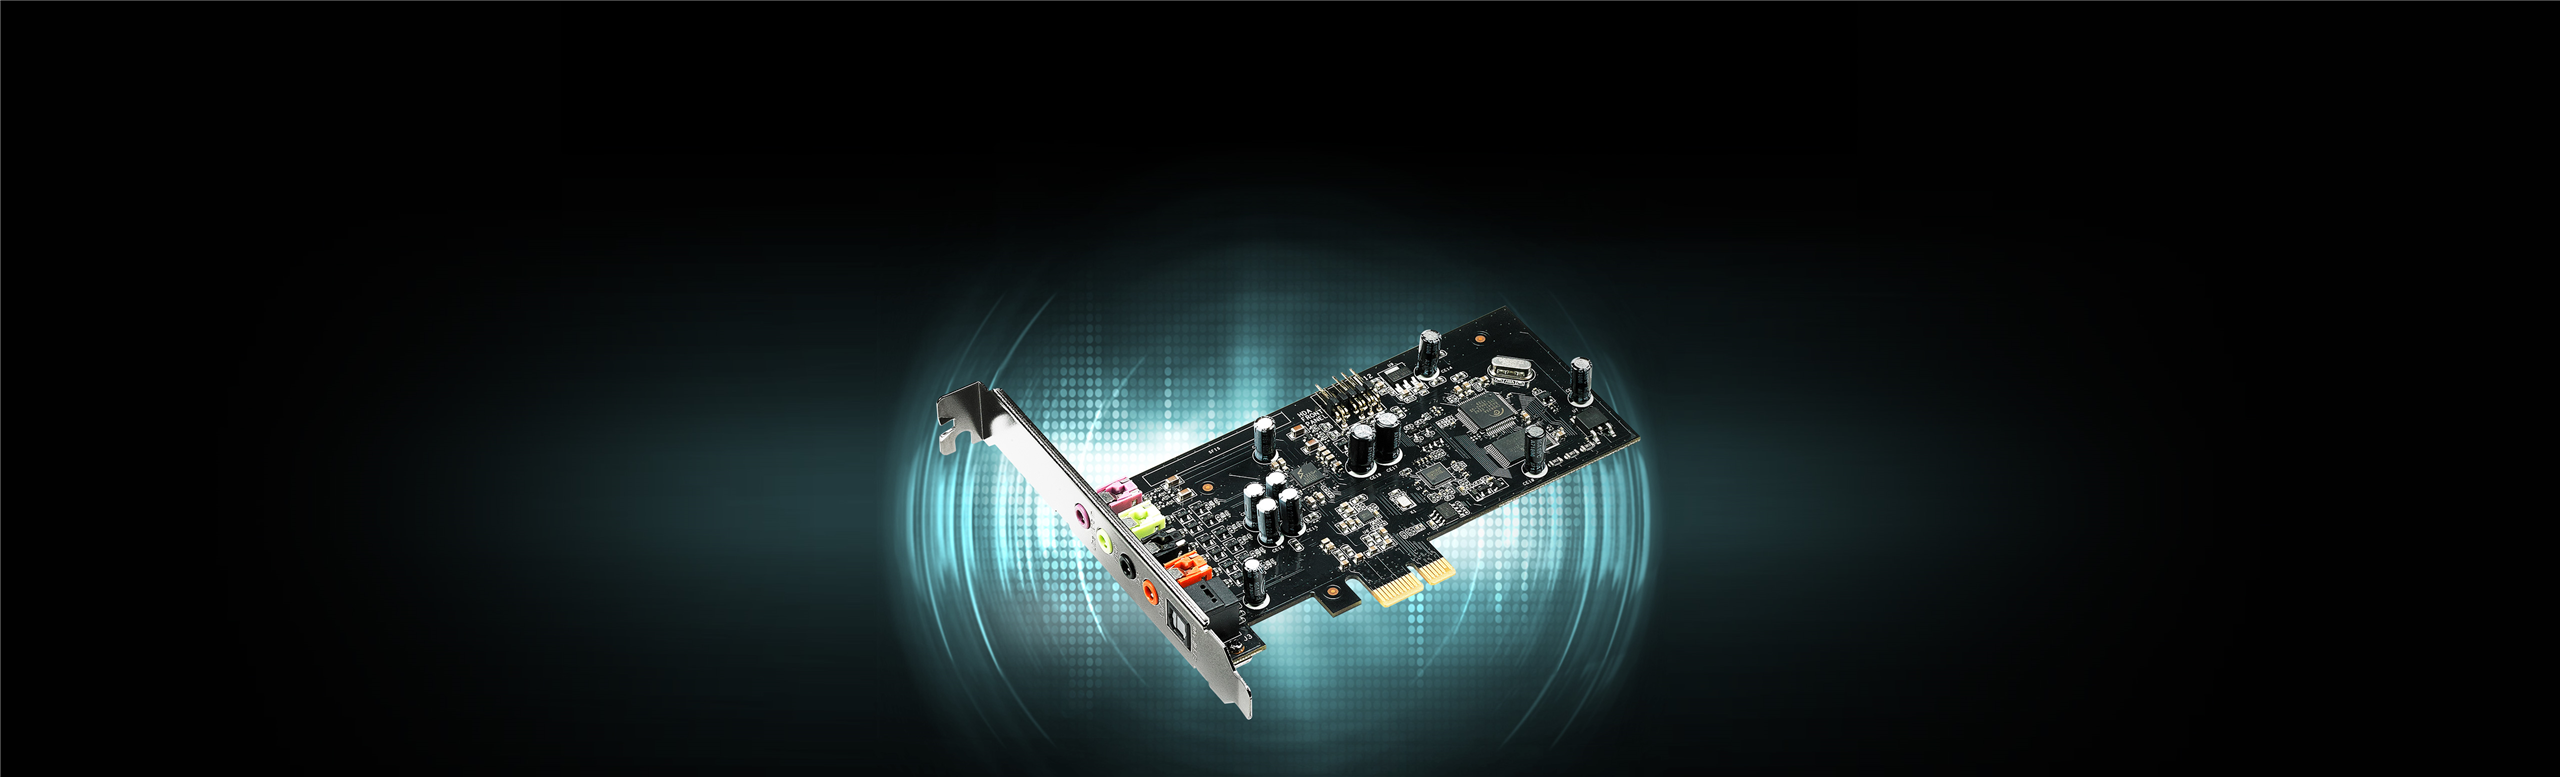 Xonar SE 5.1 PCIe gaming sound card product photo with sound waves light background